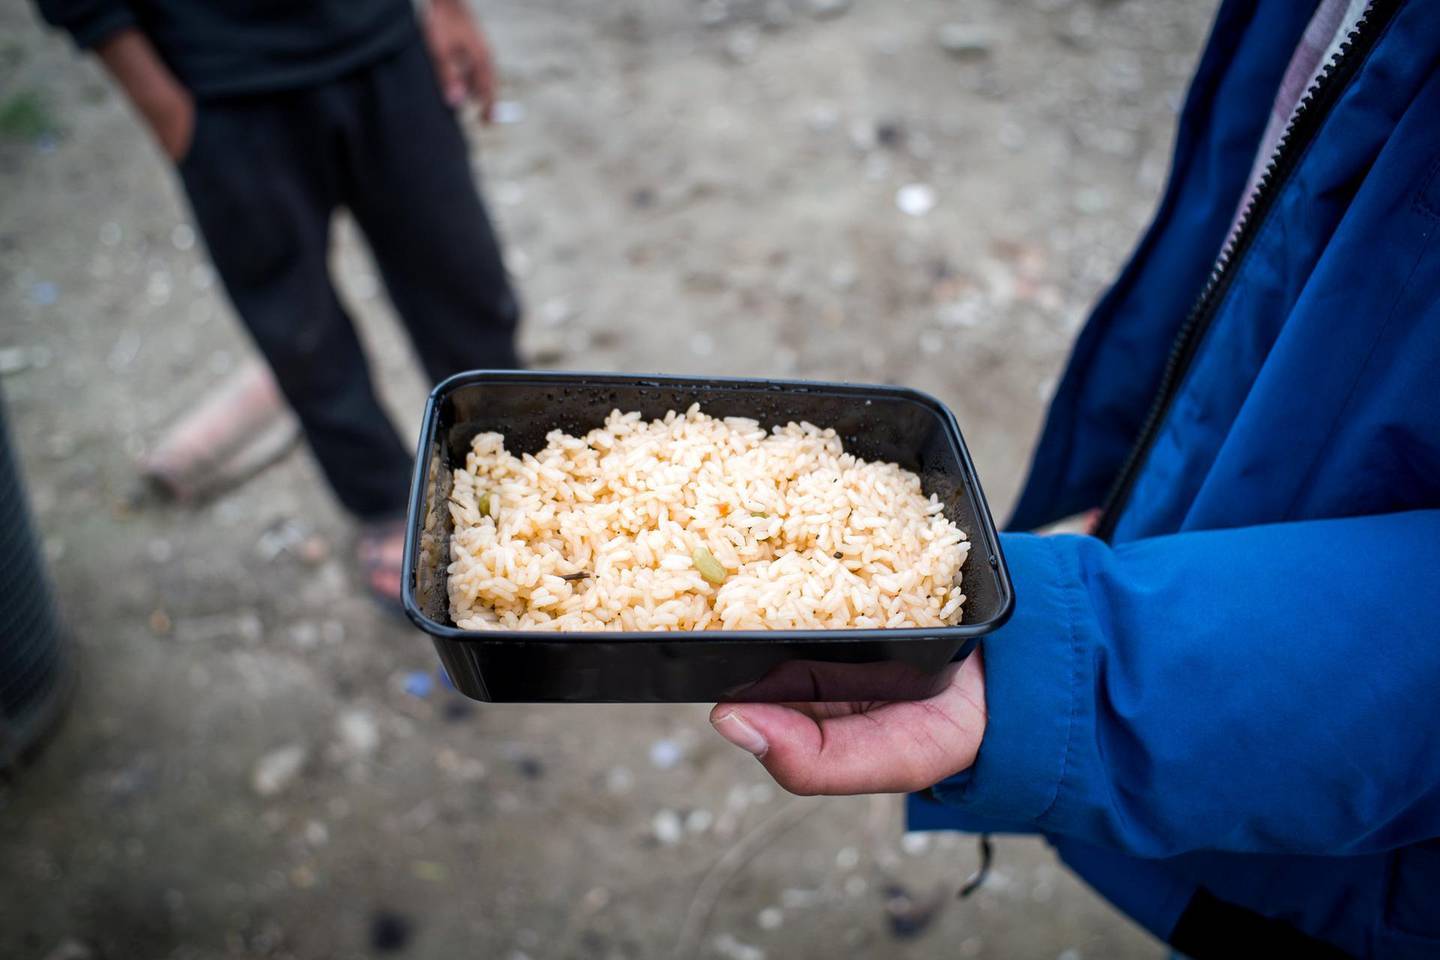 A Syrian refugee is showing me the food that has been served to the camp, and describing it as bad.